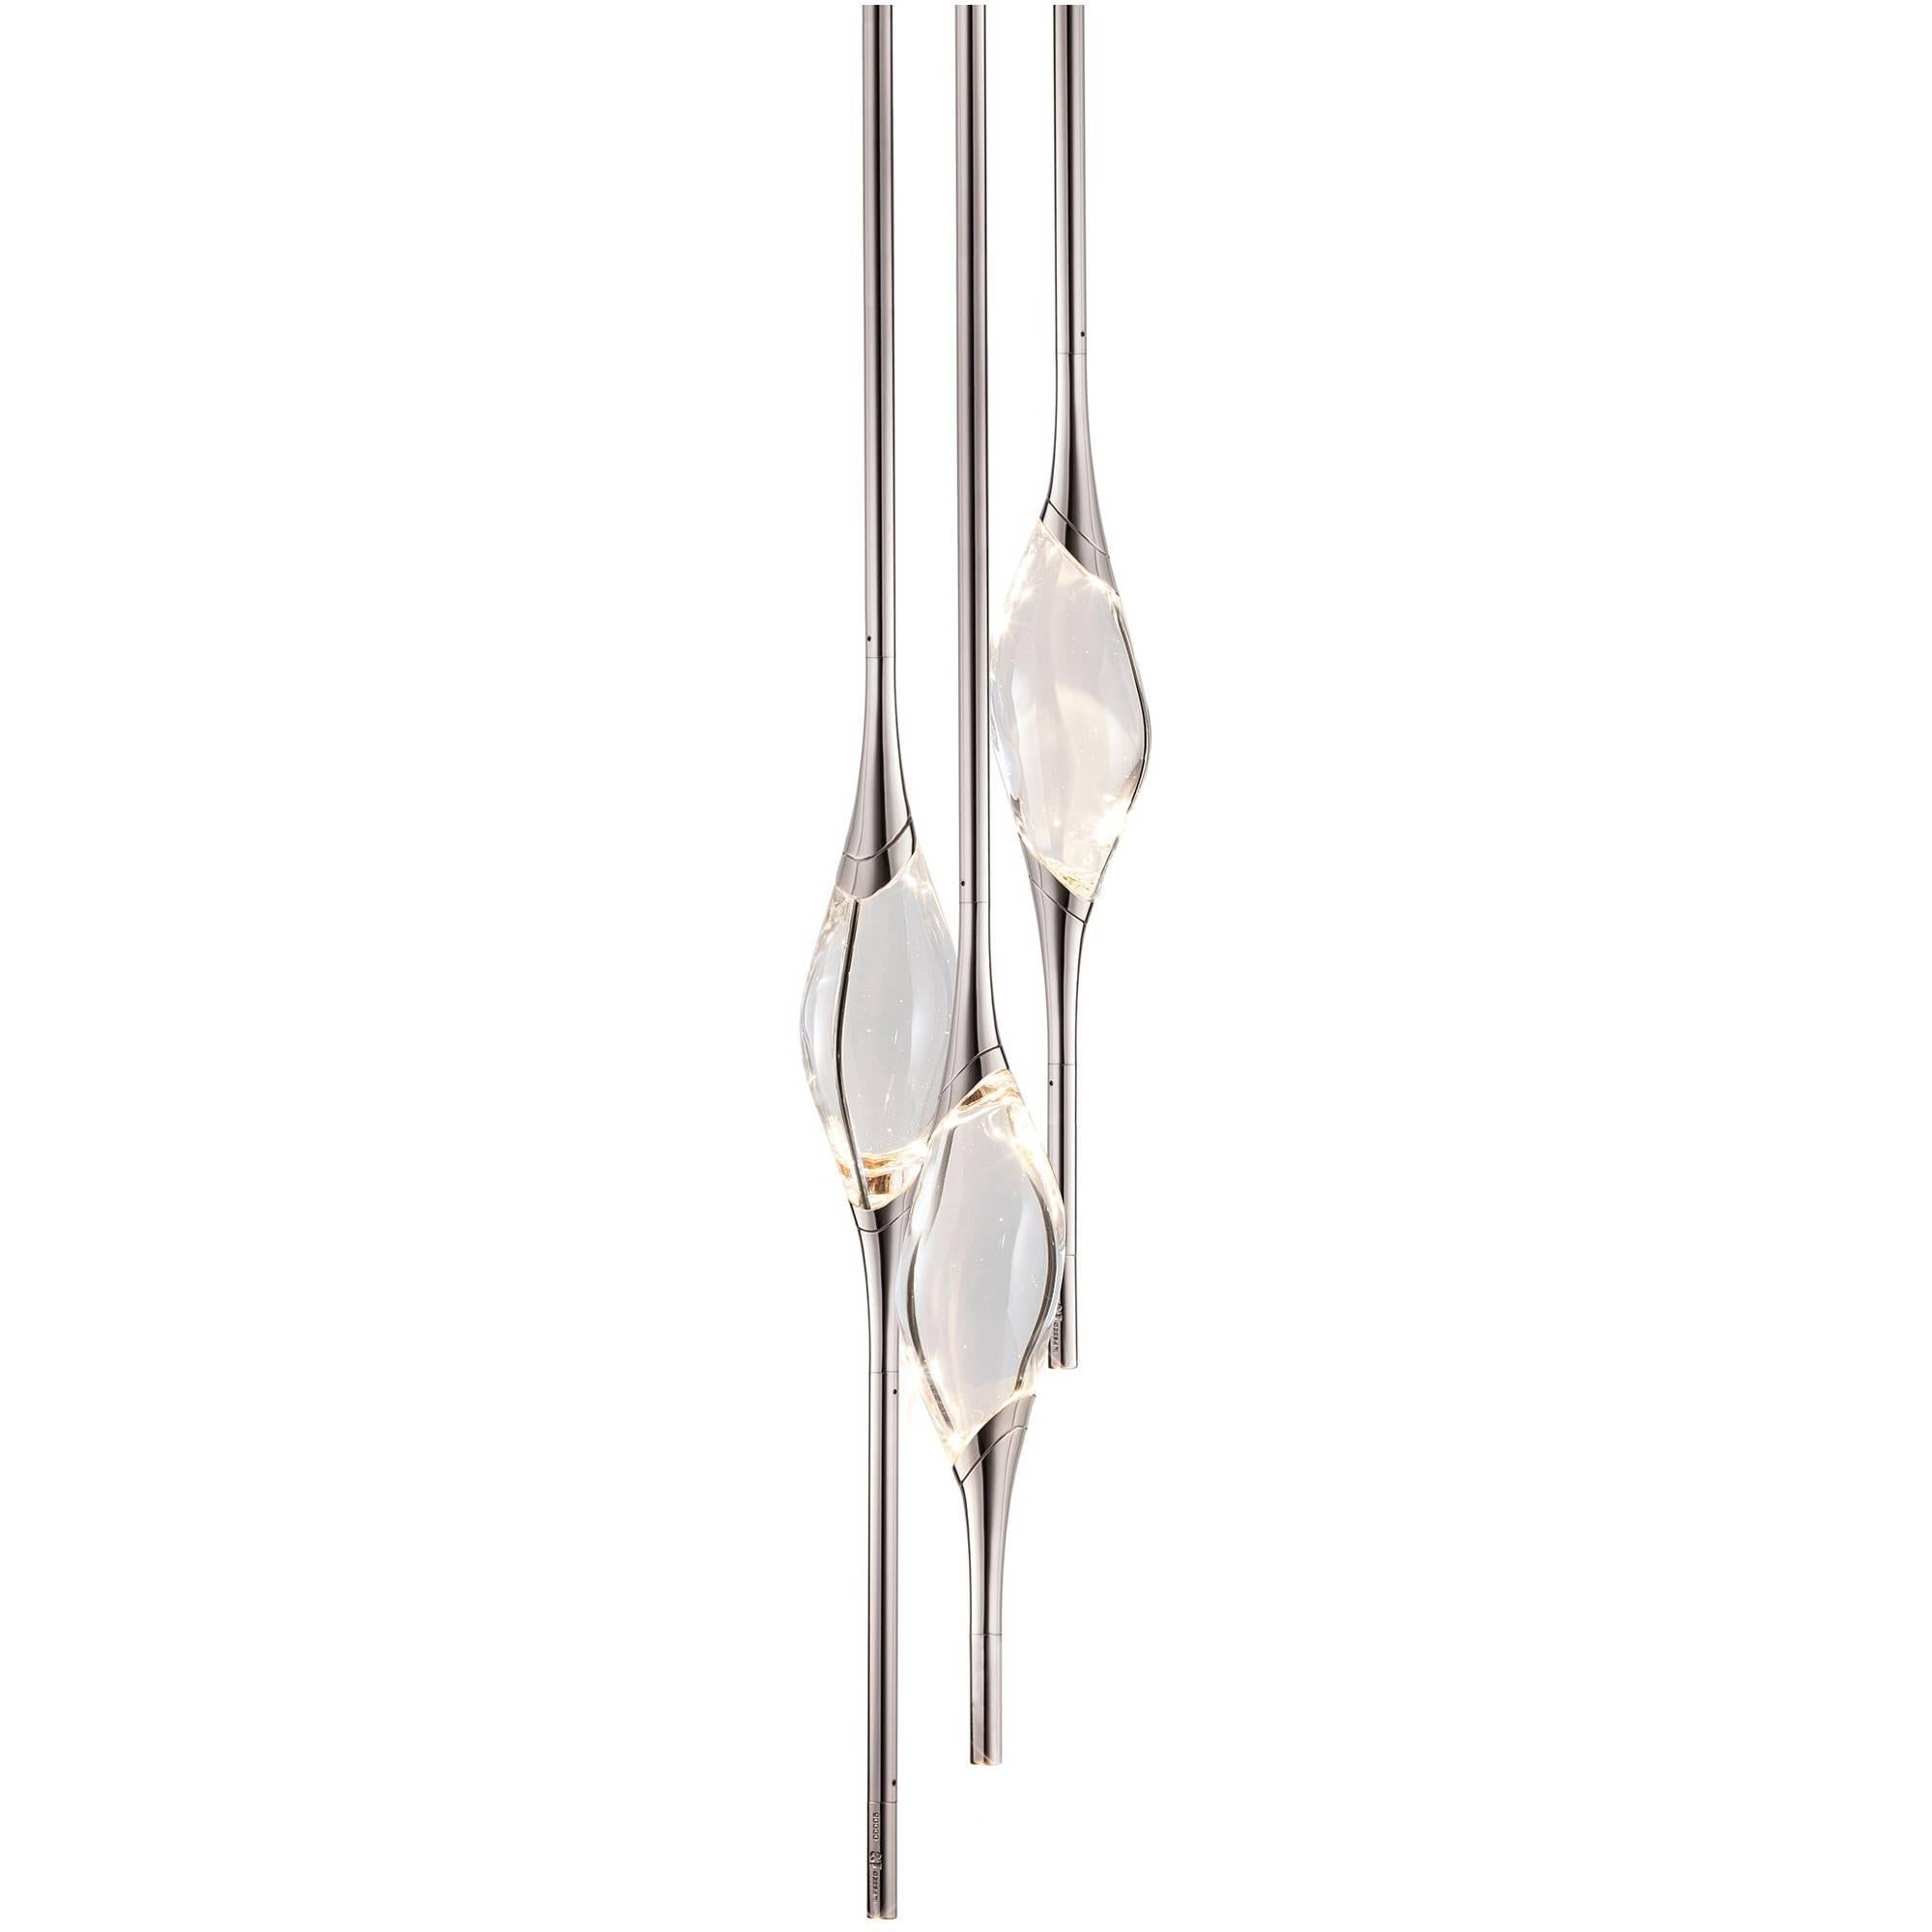 "Il Pezzo 12 Round Chandelier" - height 120cm/47.2" - nickel - crystal - LEDs